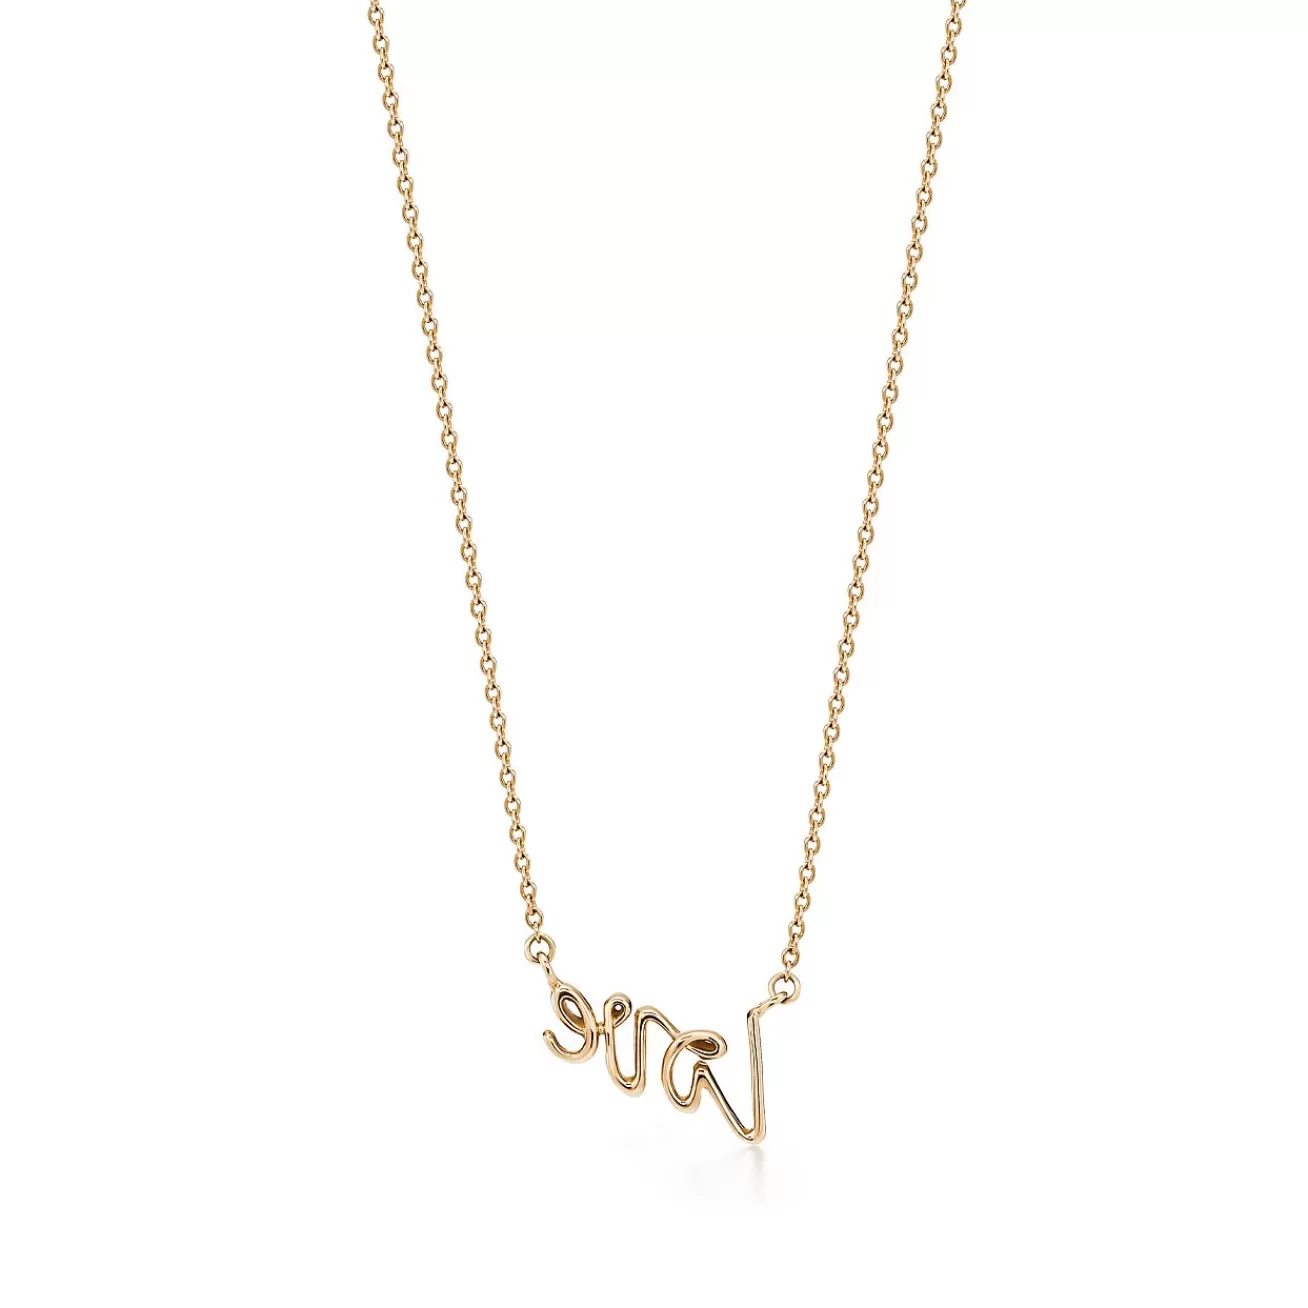 Tiffany & Co. Paloma's Graffiti love pendant in 18k gold, mini. | ^ Necklaces & Pendants | Gifts for Her